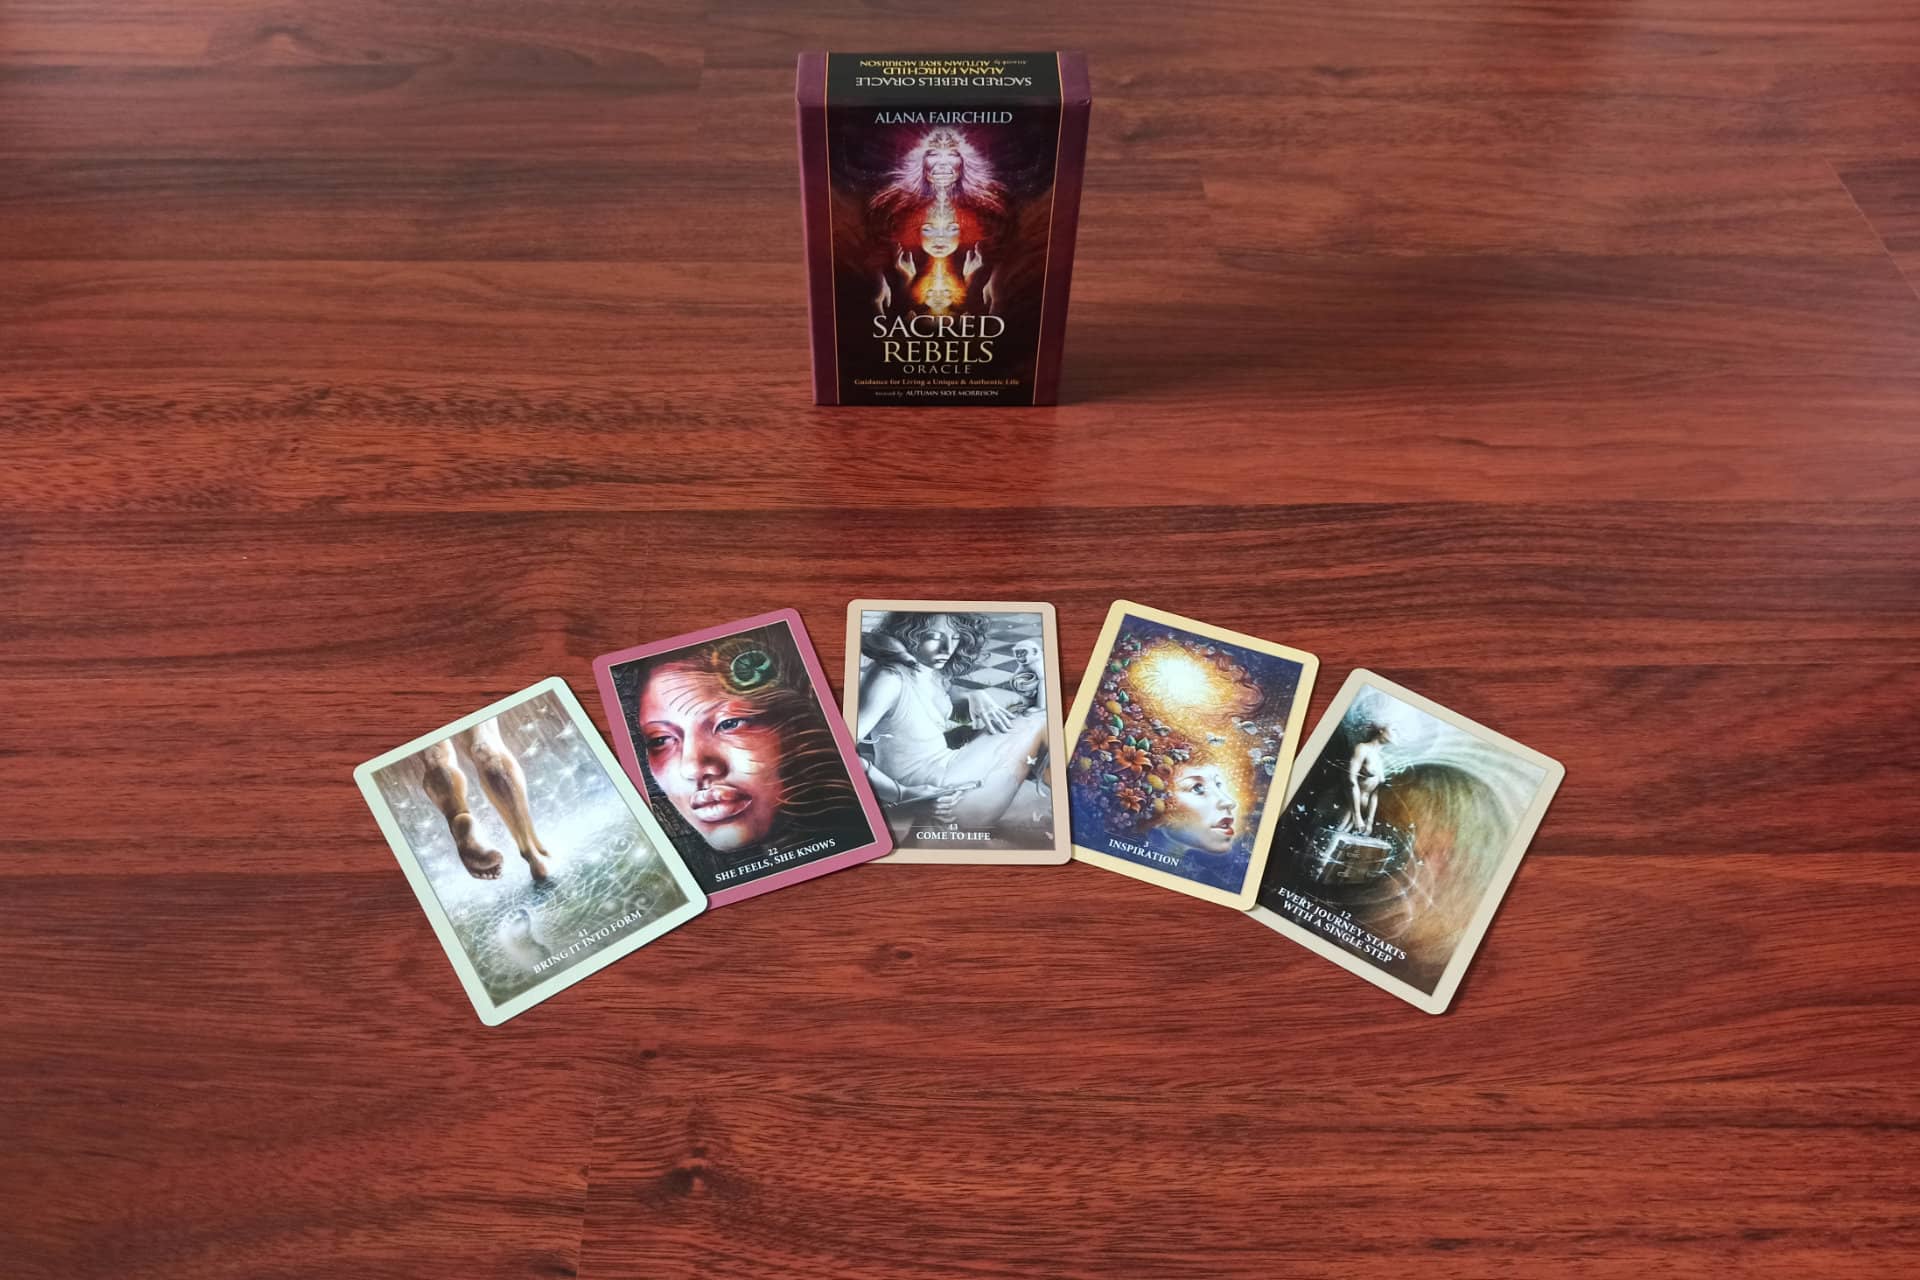 Oracle Cards: Sacred Rebels - Example cards on the floor